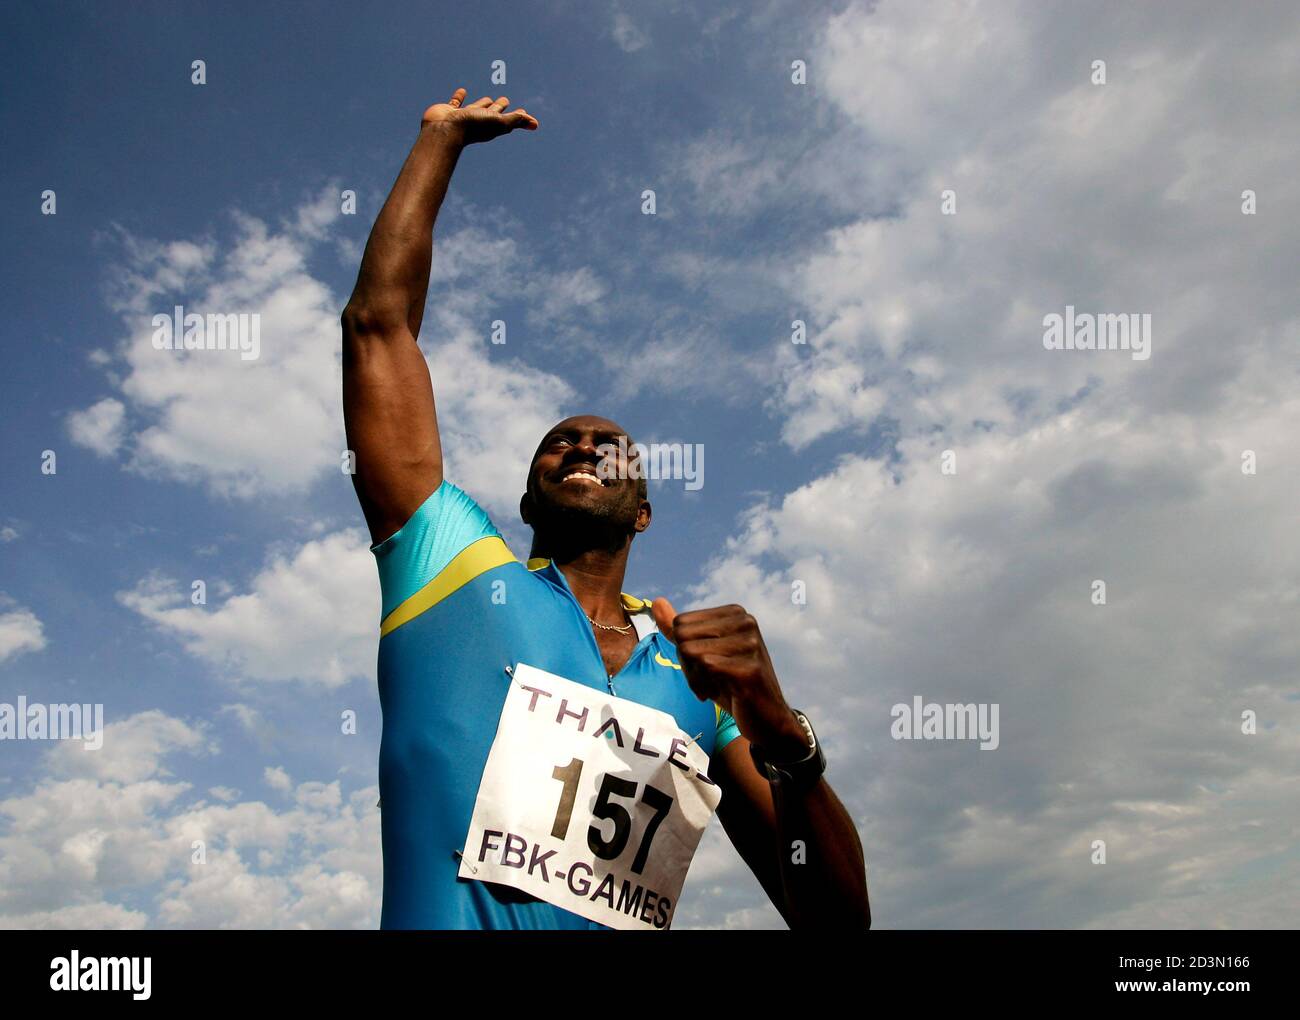 Allen Johnson of the U.S. waves after competing in the men's 110 metres  hurdles during the FBK Games in Hengelo, Netherlands, May 29, 2005. REUTERS/Jerry  Lampen JFL/MK Stock Photo - Alamy